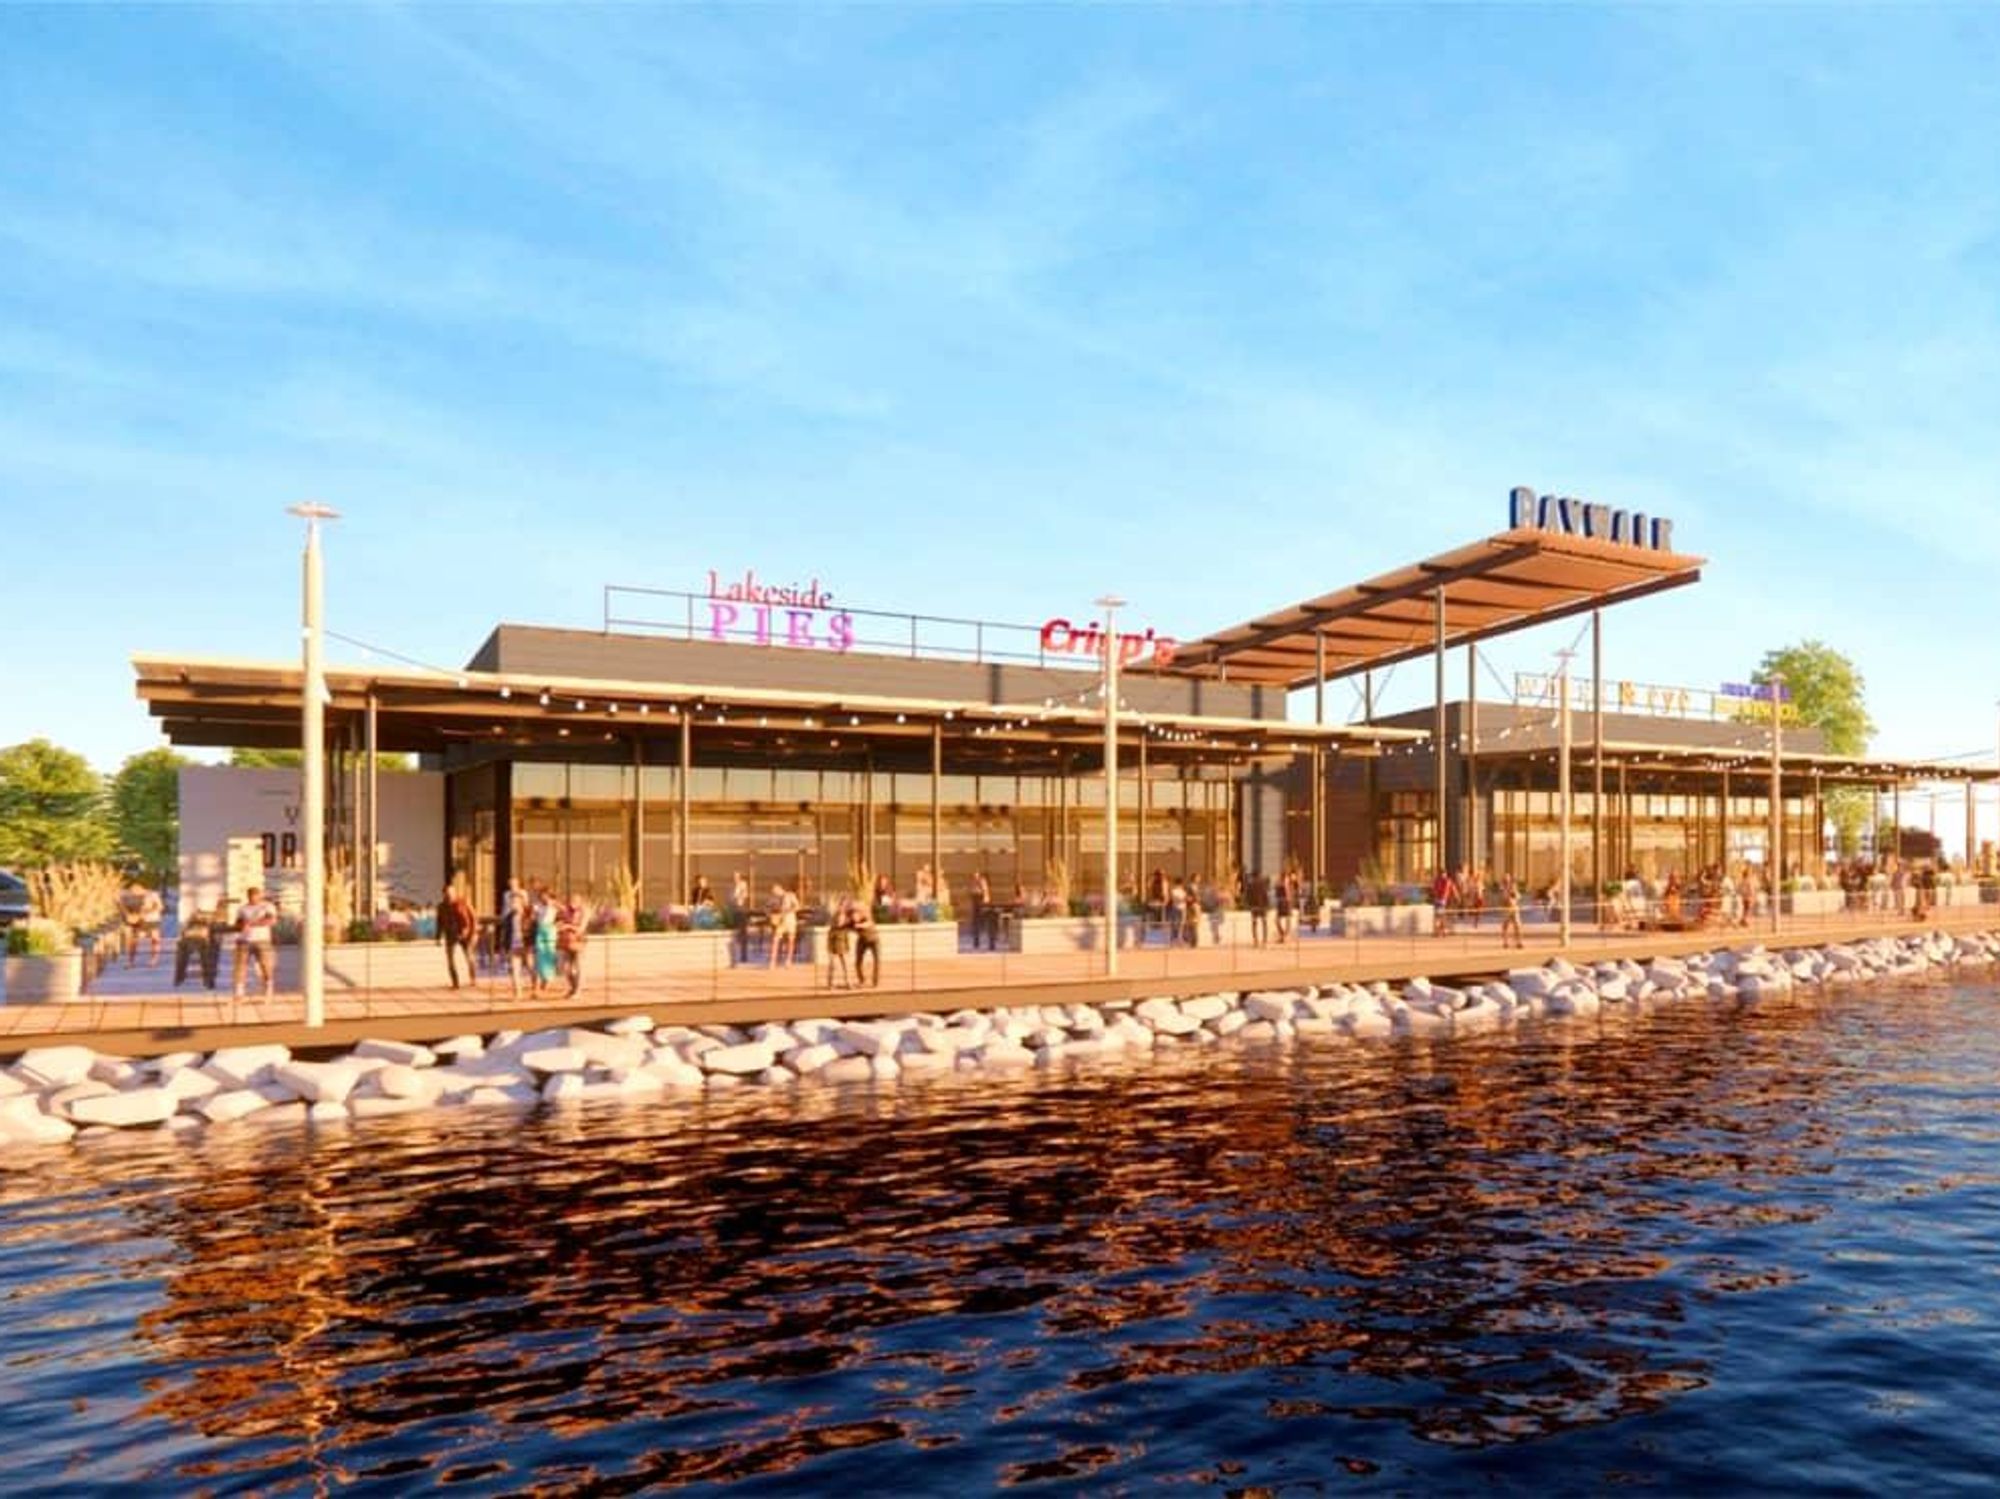 New restaurant park on the waterfront joins lakeside marina in Rowlett -  CultureMap Dallas